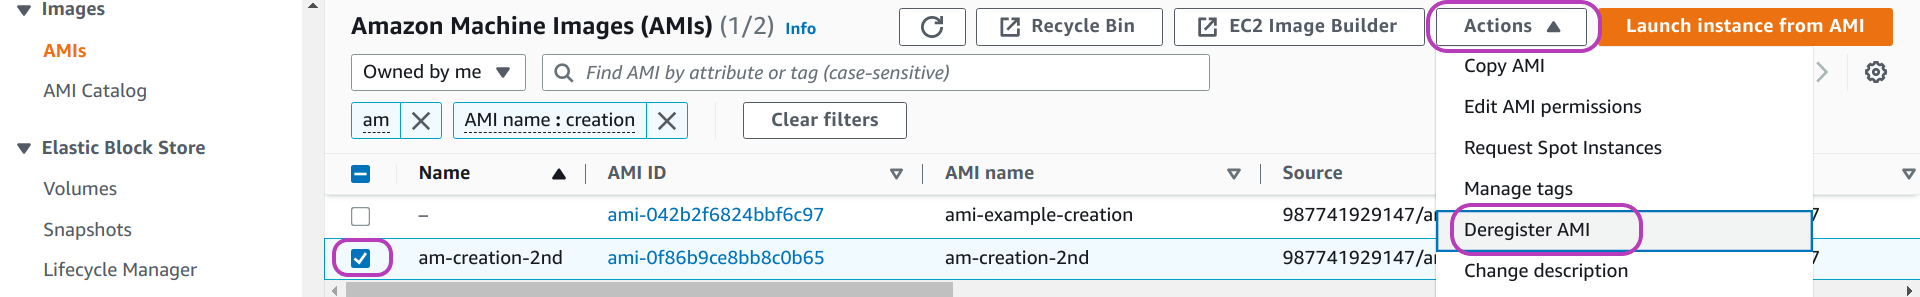 Screenshot of AWS Console "Amazon Machine Images (AMIs)" page in a browser, showing the following items circled: the checkbox to the left of an AMI name checked, the "Actions" drop-down menu at the top, and the option "Deregister AMI" (within the "Actions" menu).